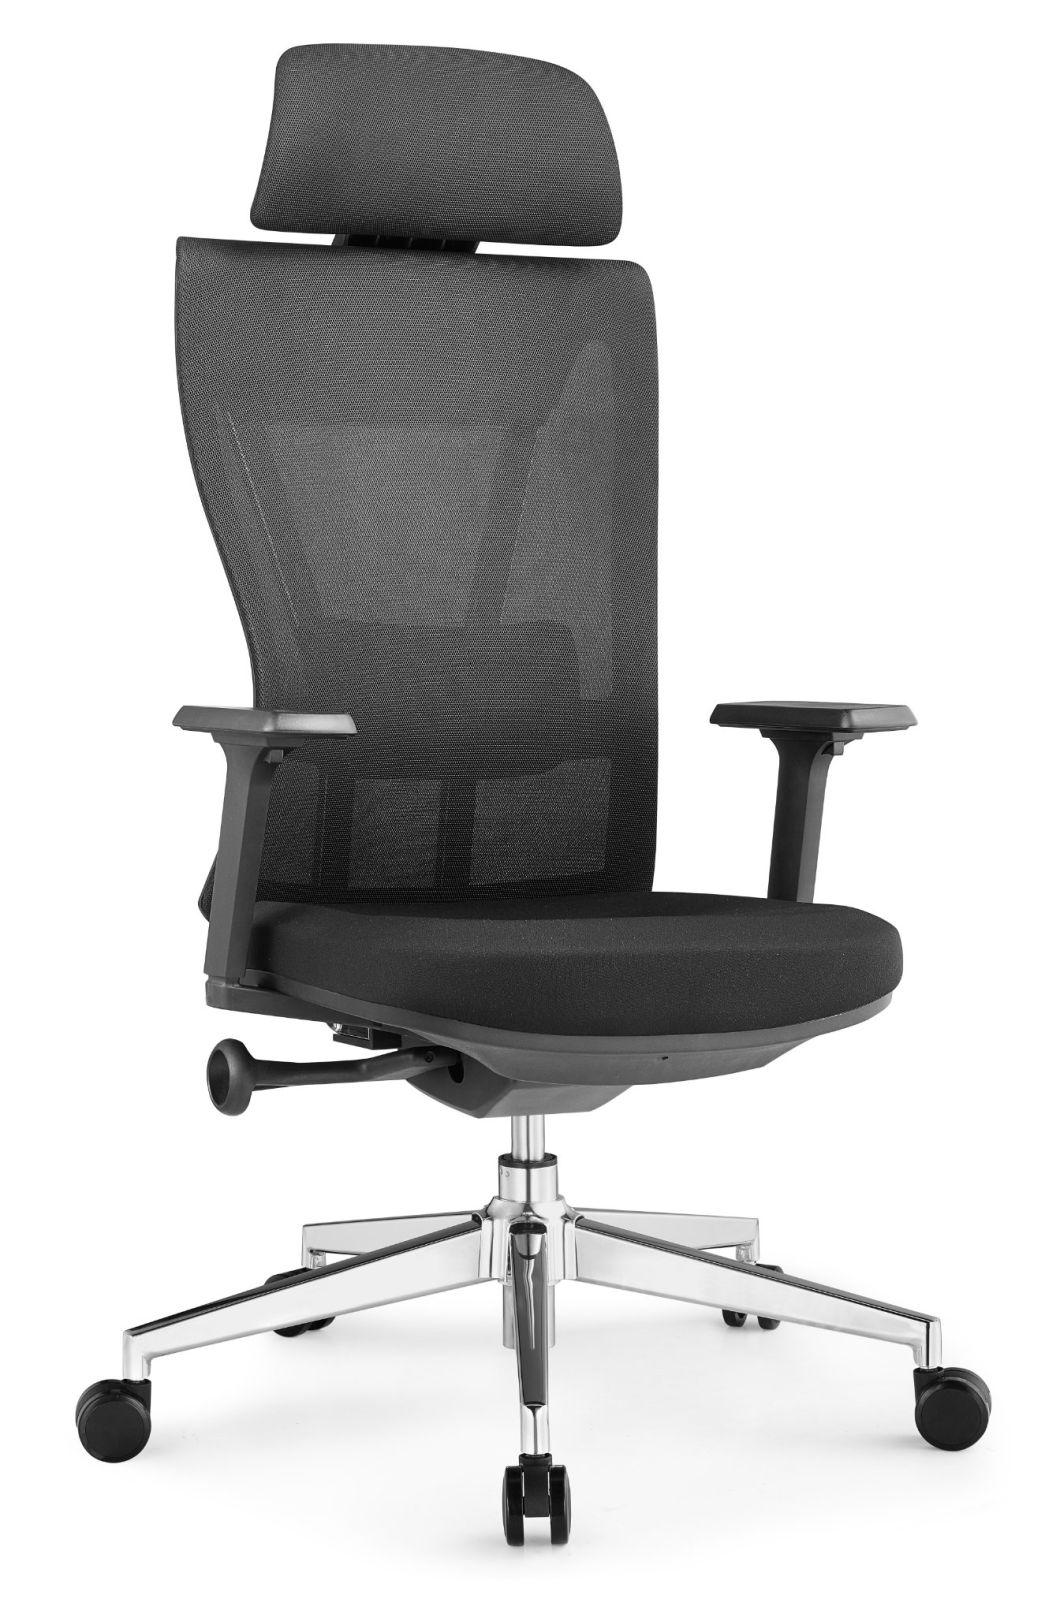 Modern Hotel Game Play Swivel Conference Executive Leather Chair Office Furniture